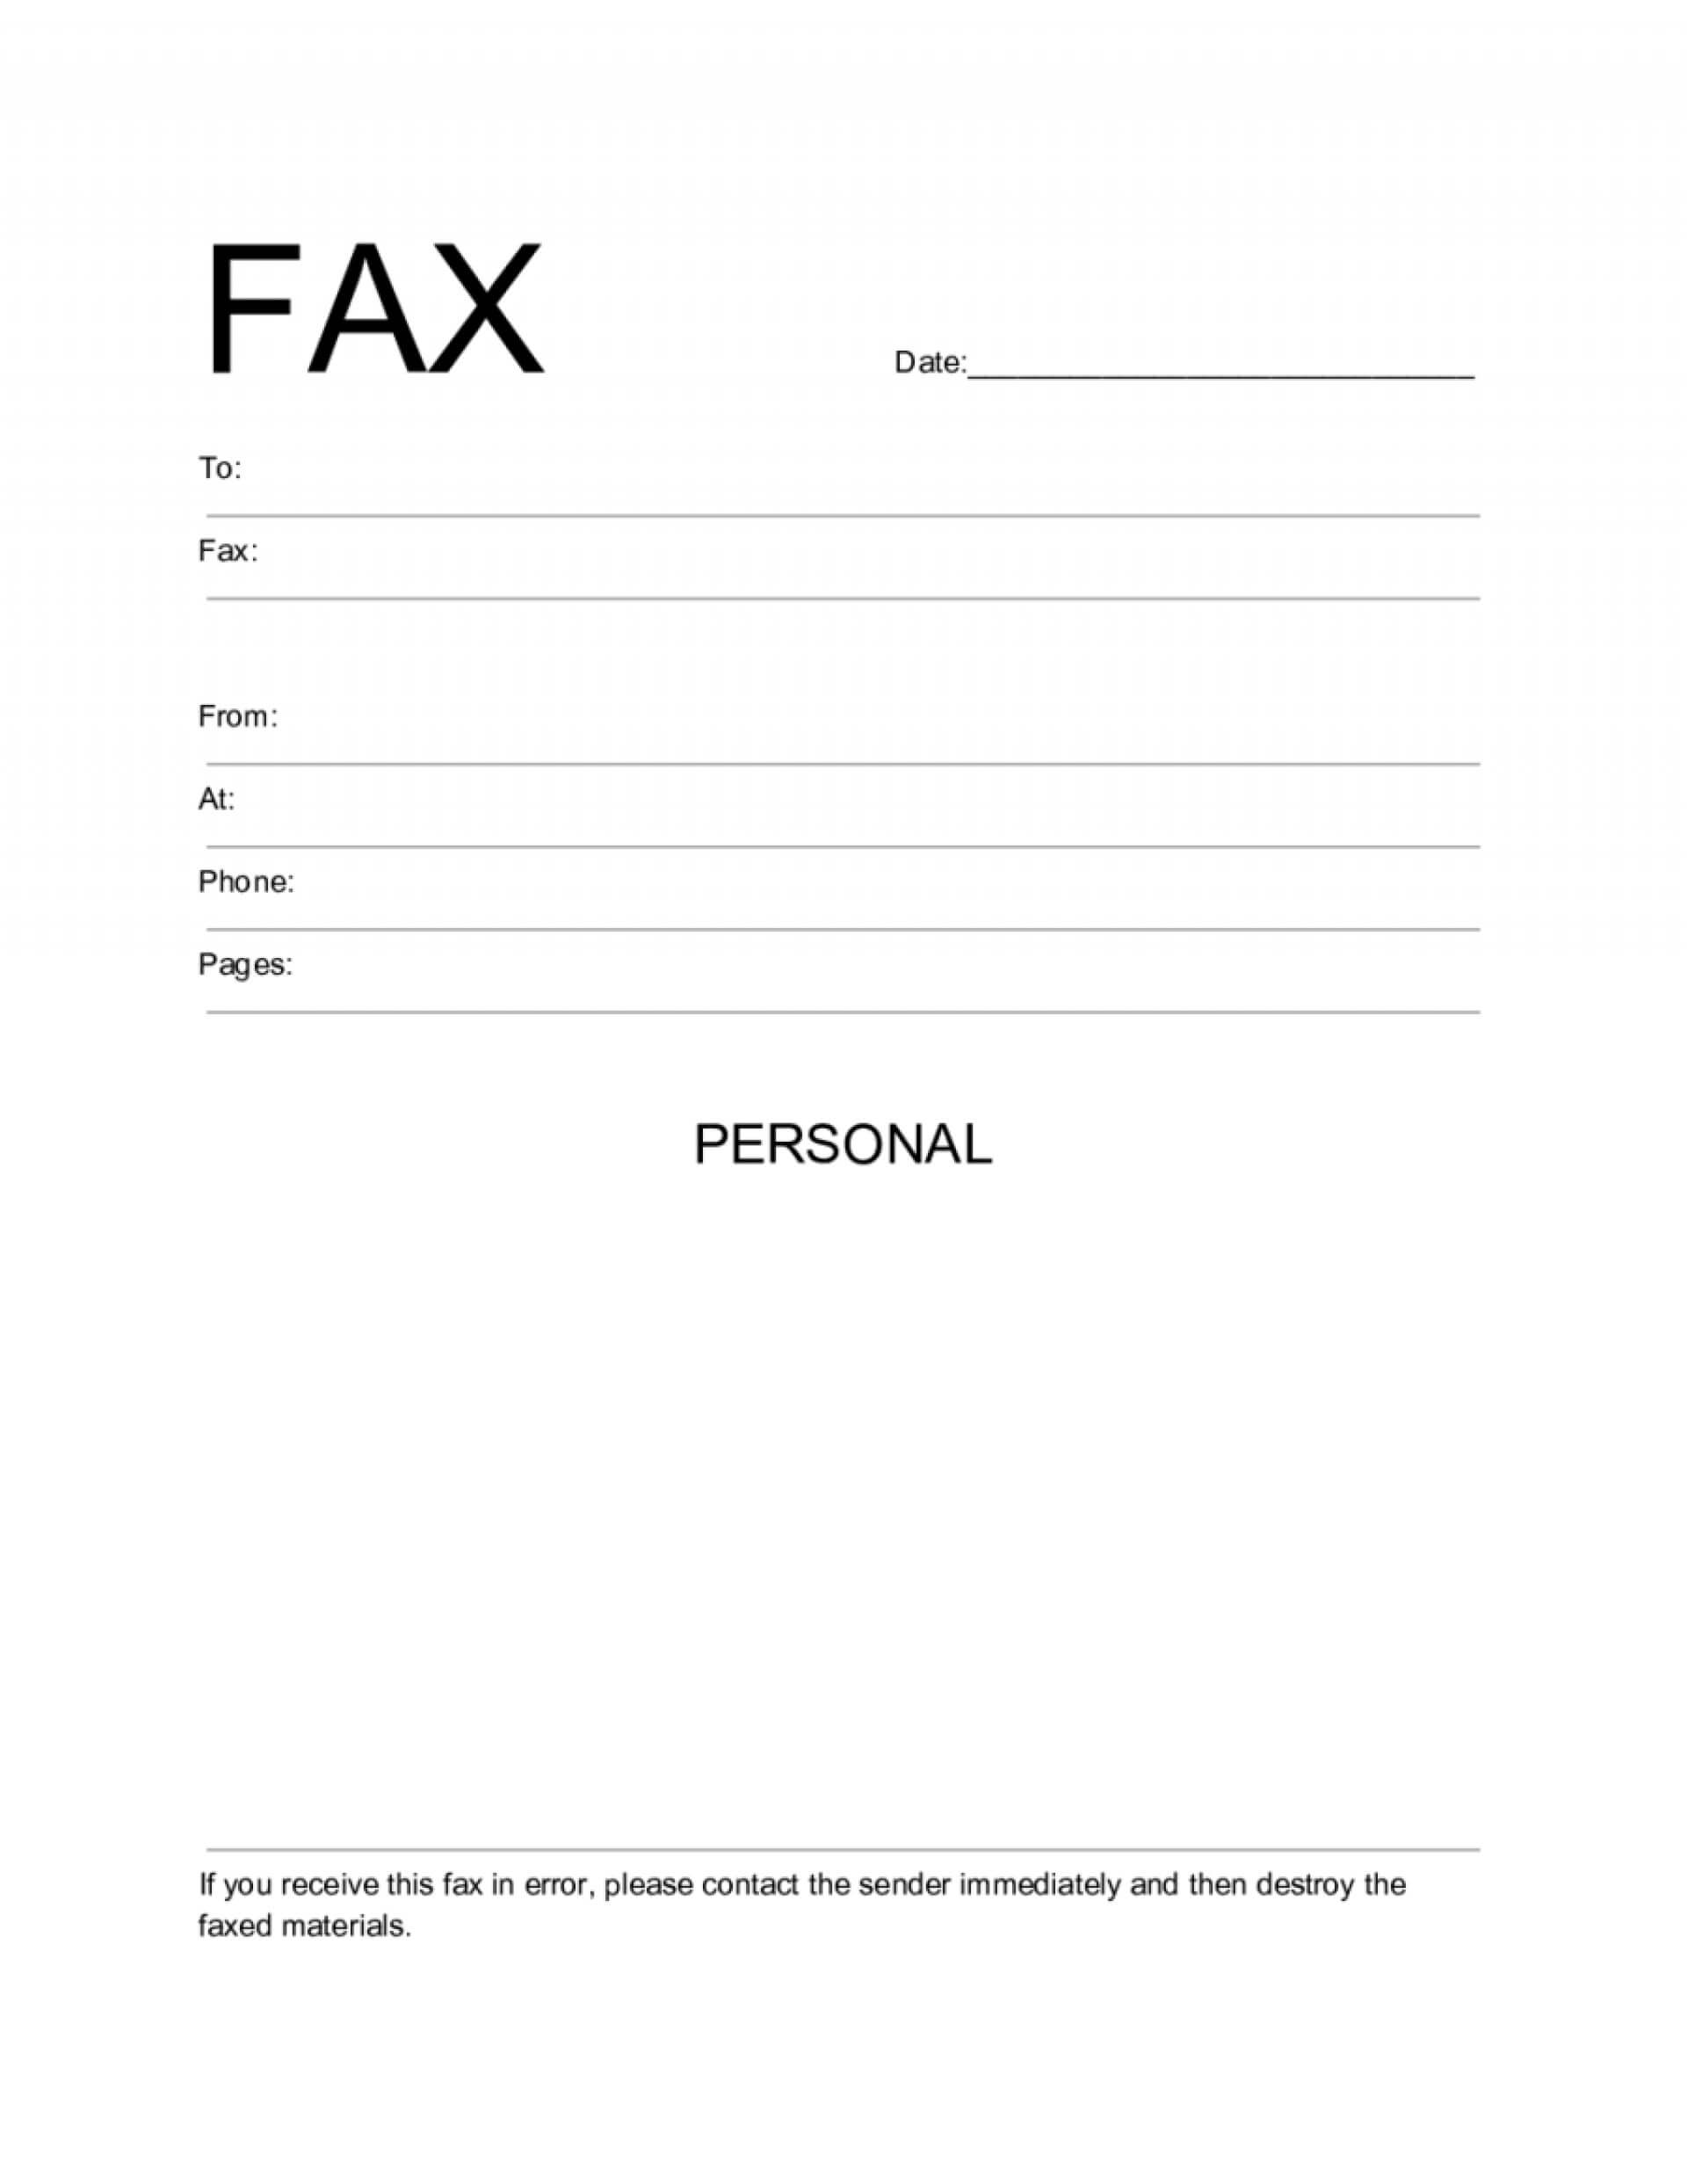 002 Fax Cover Sheet Template Word Ideas Best 2010 Page Pertaining To Fax Template Word 2010